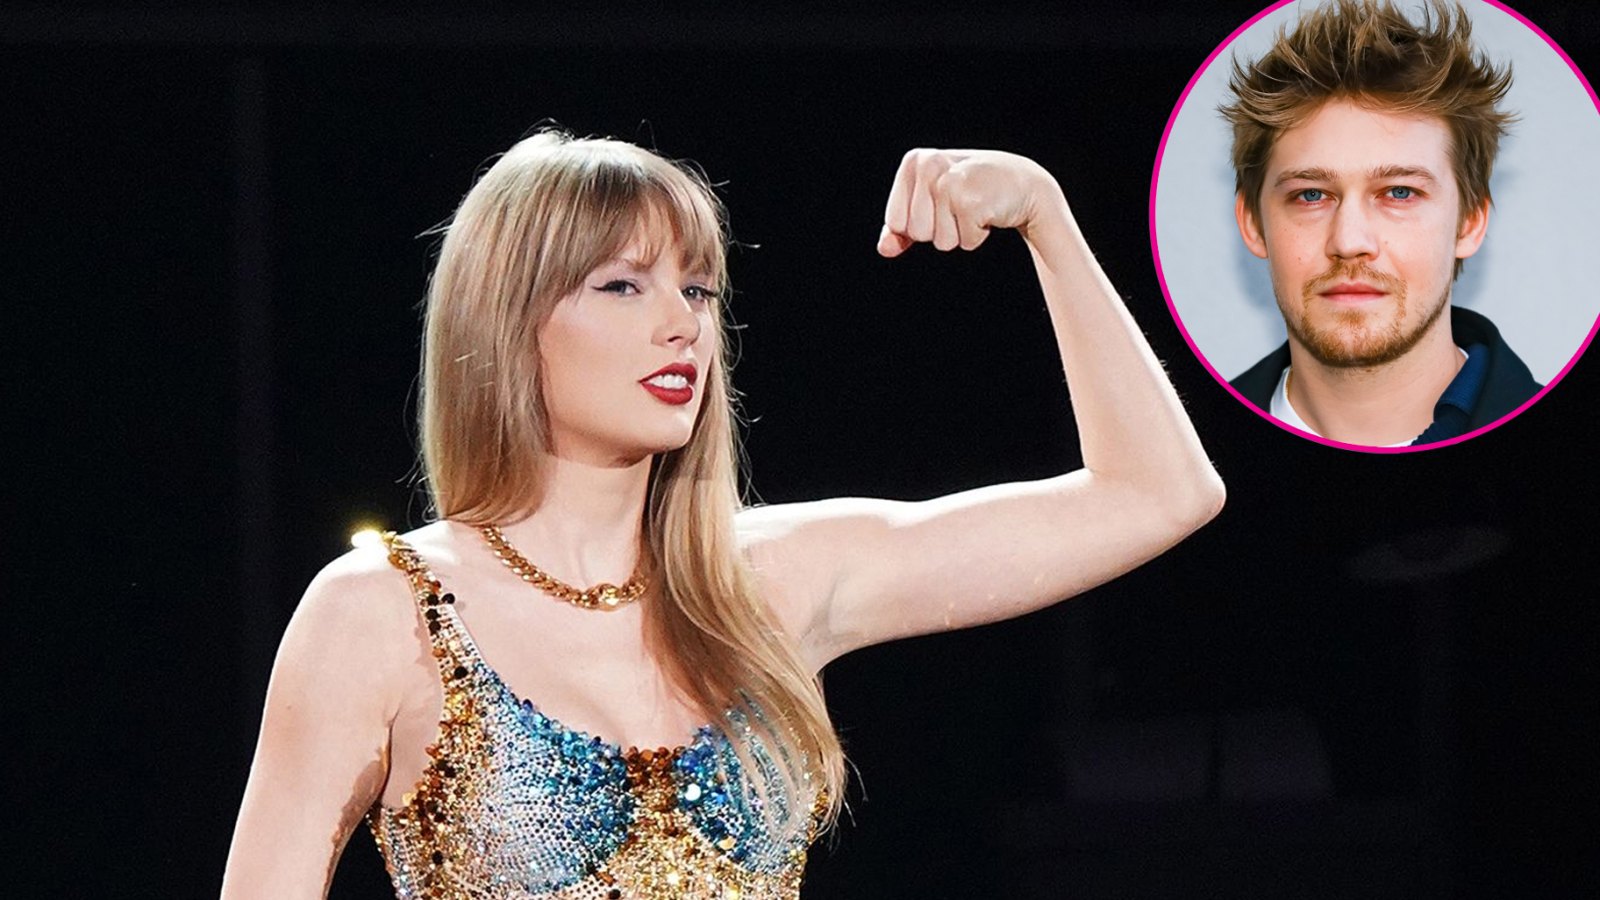 Taylor Swift's Midnights Album Release Date, News, Singles, Songs